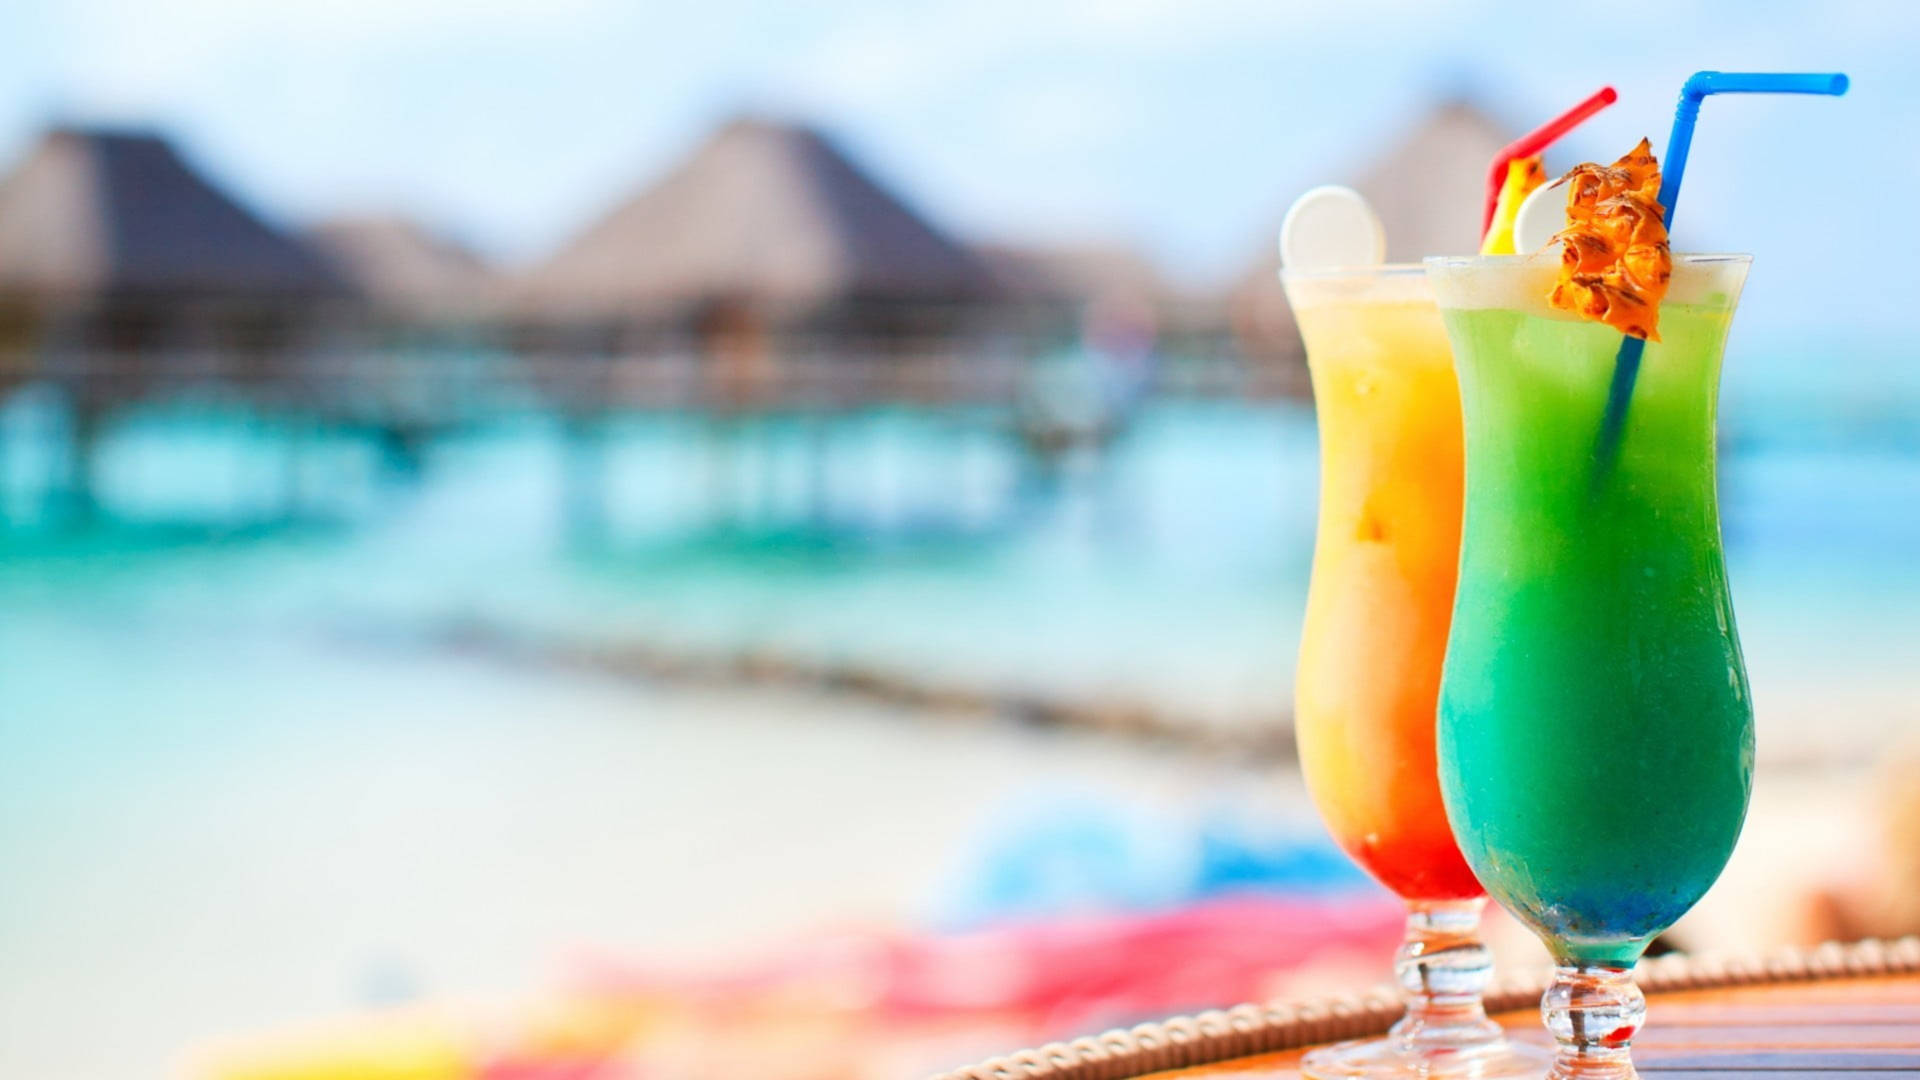 Blue Curacao, Tequila Sunrise Tropical Drink Background